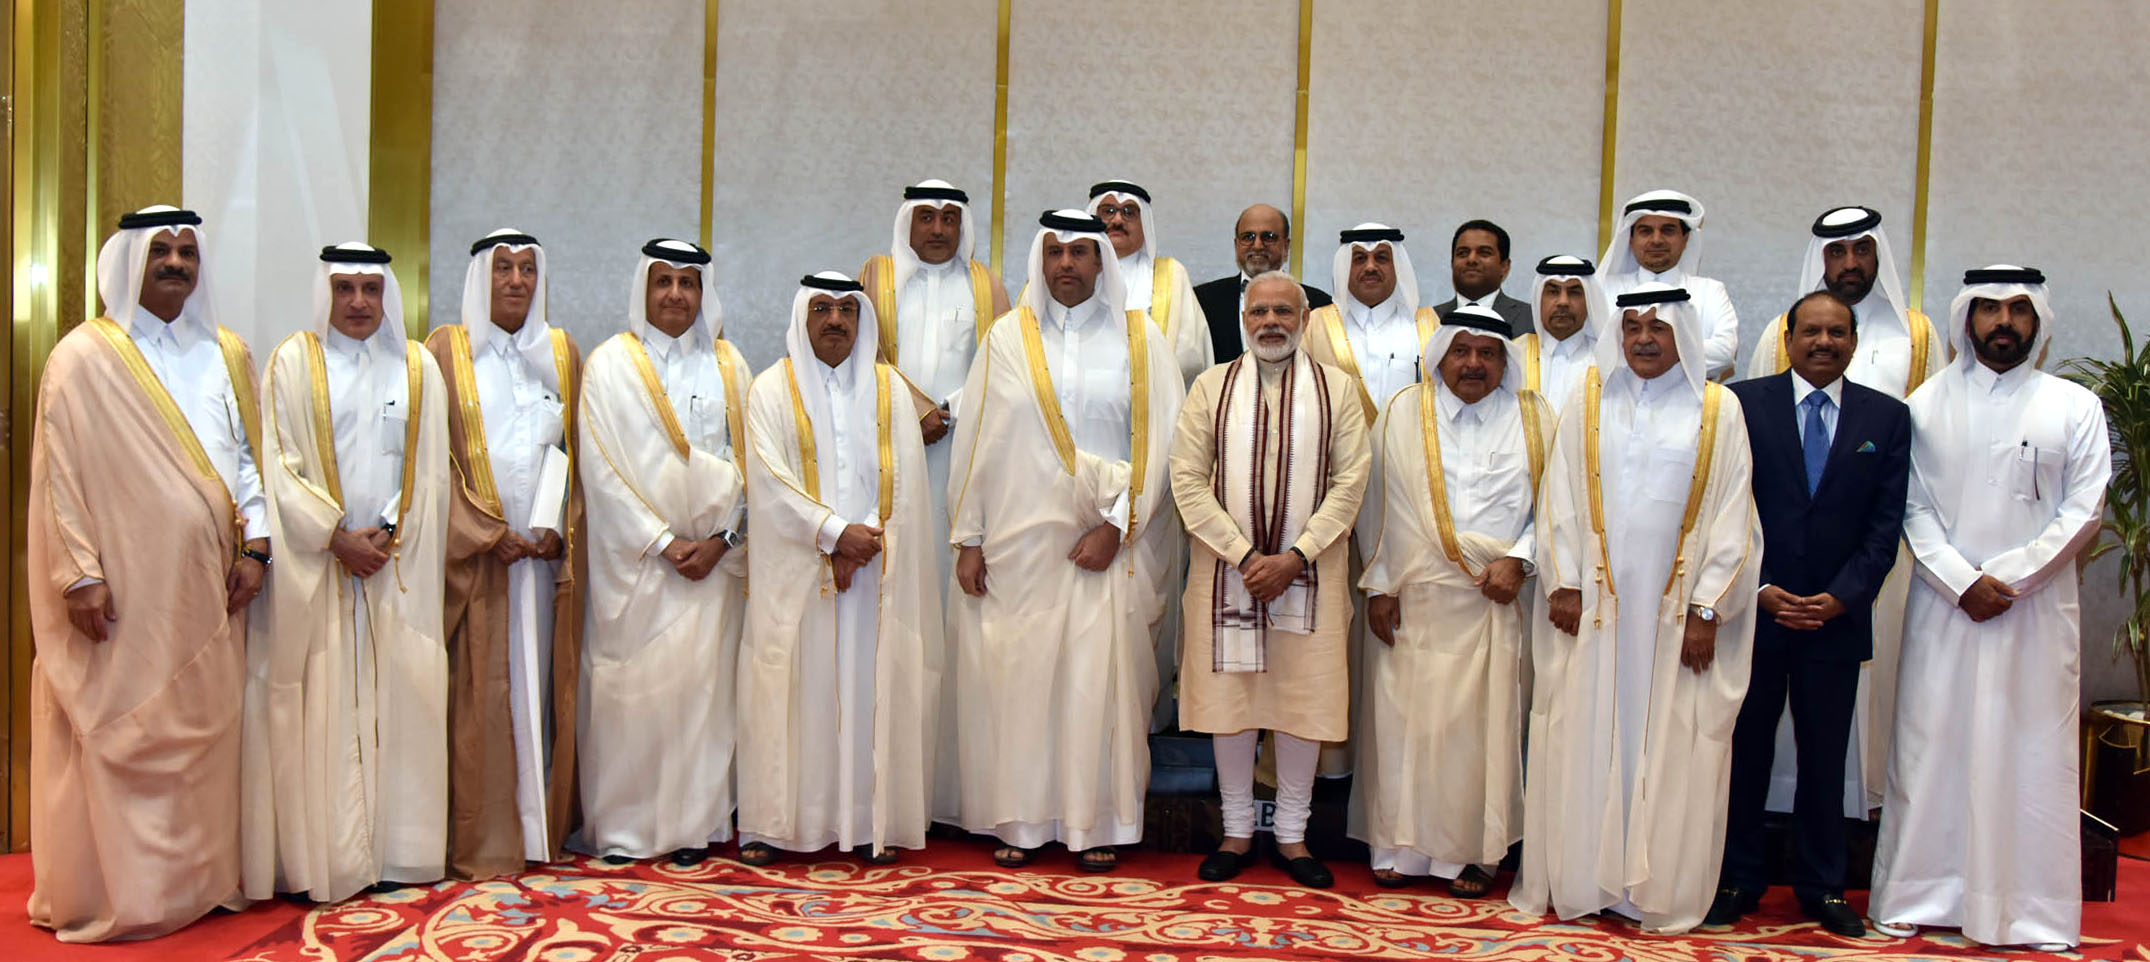 The Prime Minister, Shri Narendra Modi with the Business Leaders, at Doha, Qatar on June 05, 2016.